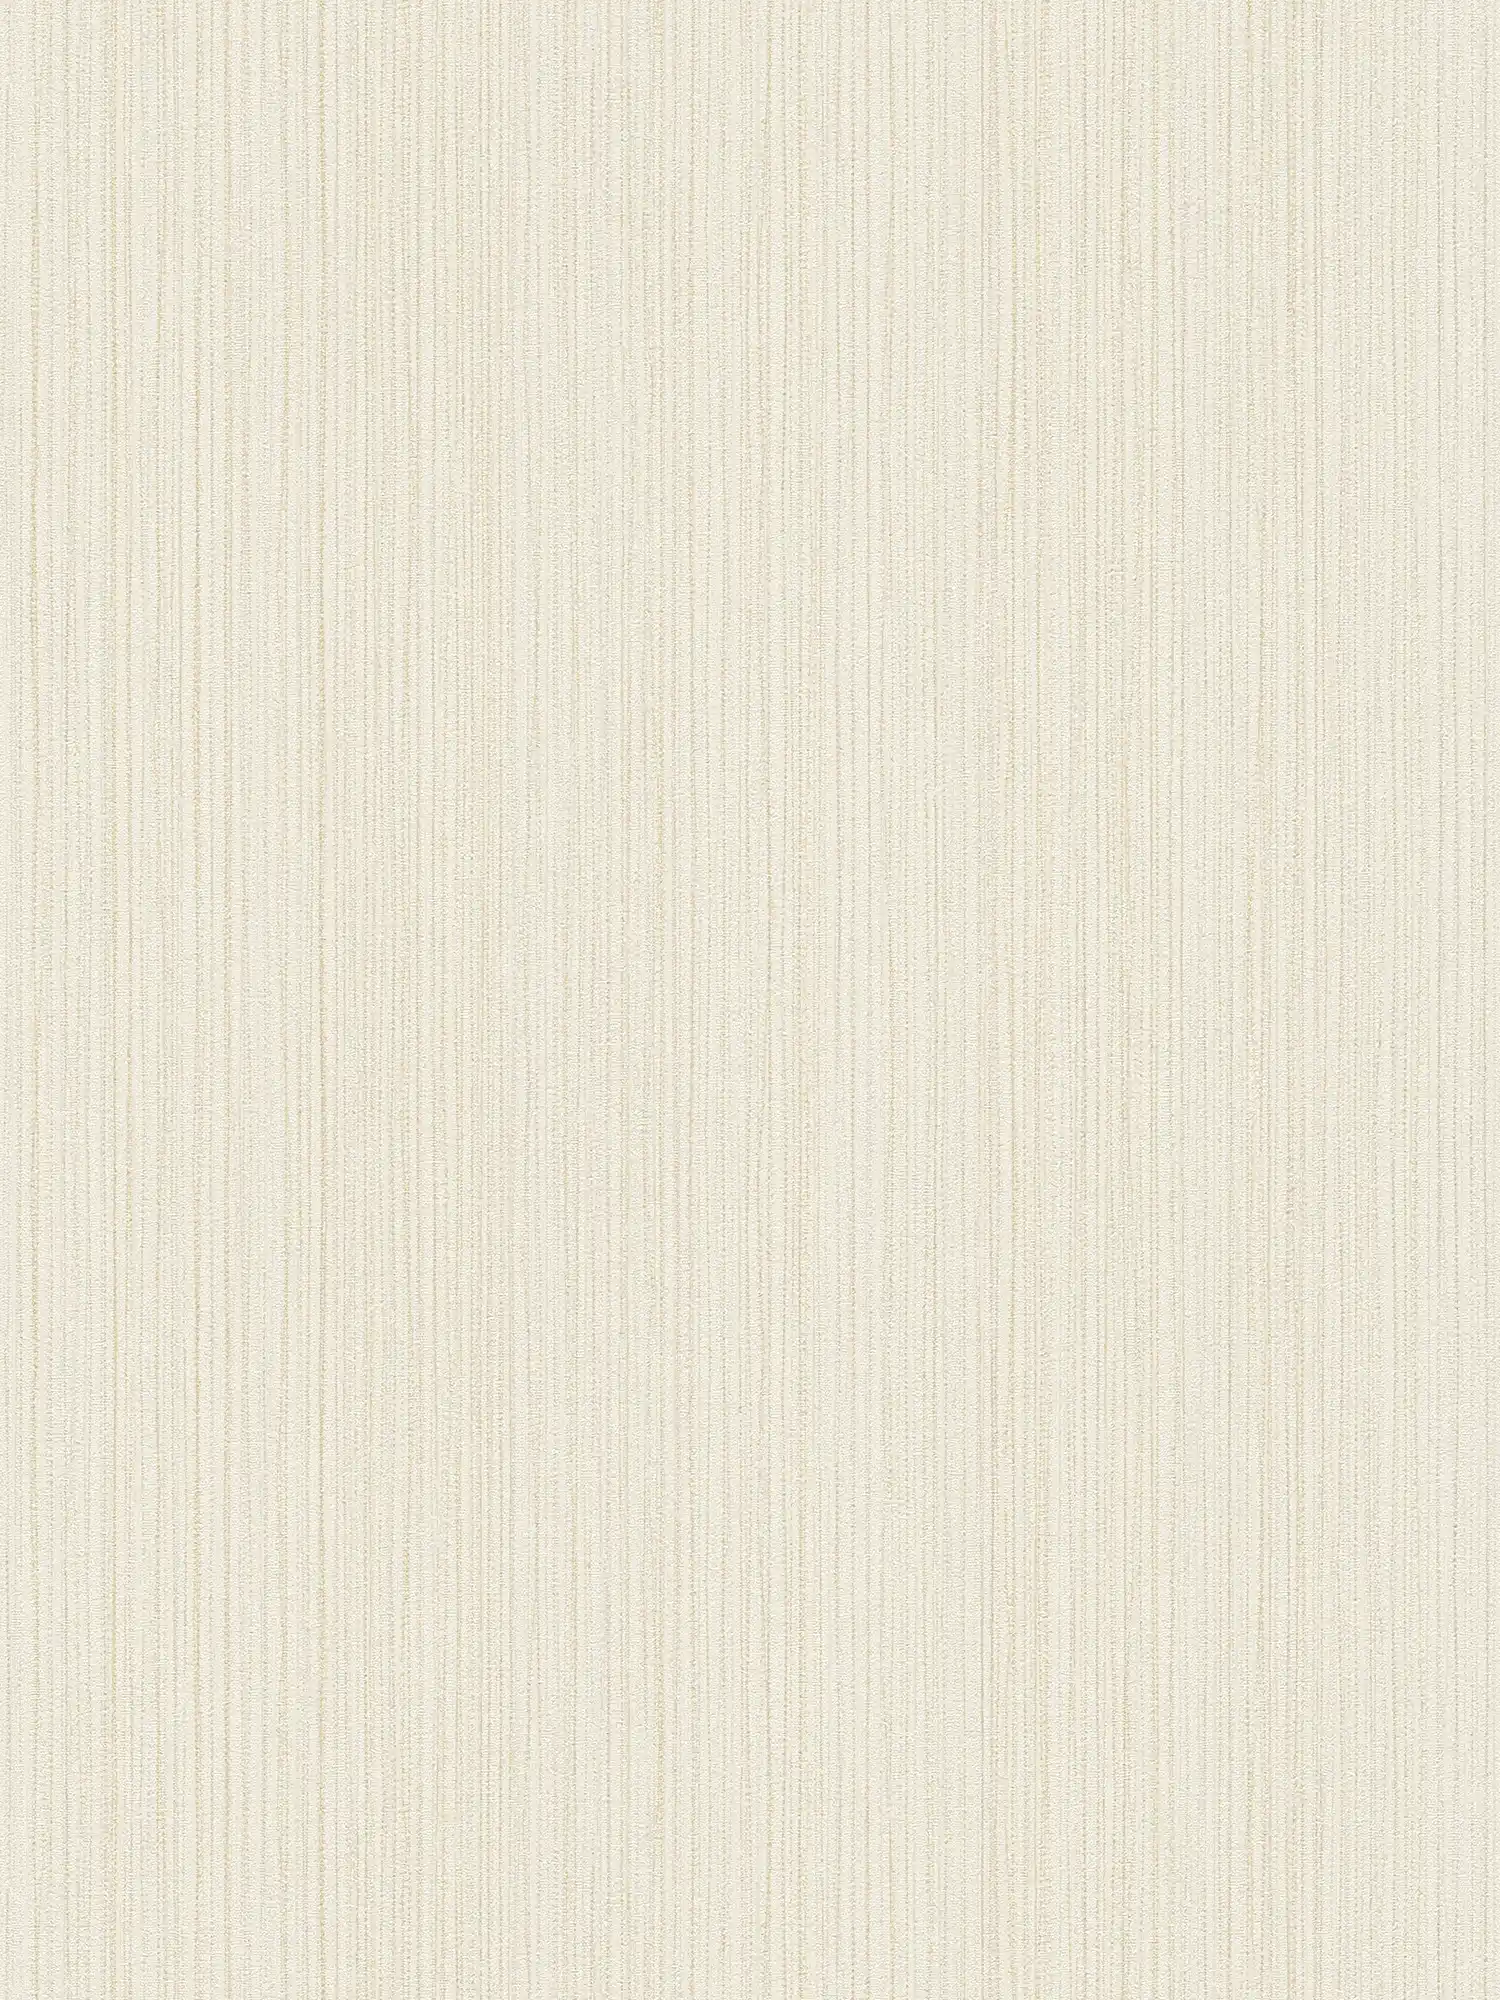         Plain wallpaper ivory with line texture - cream
    